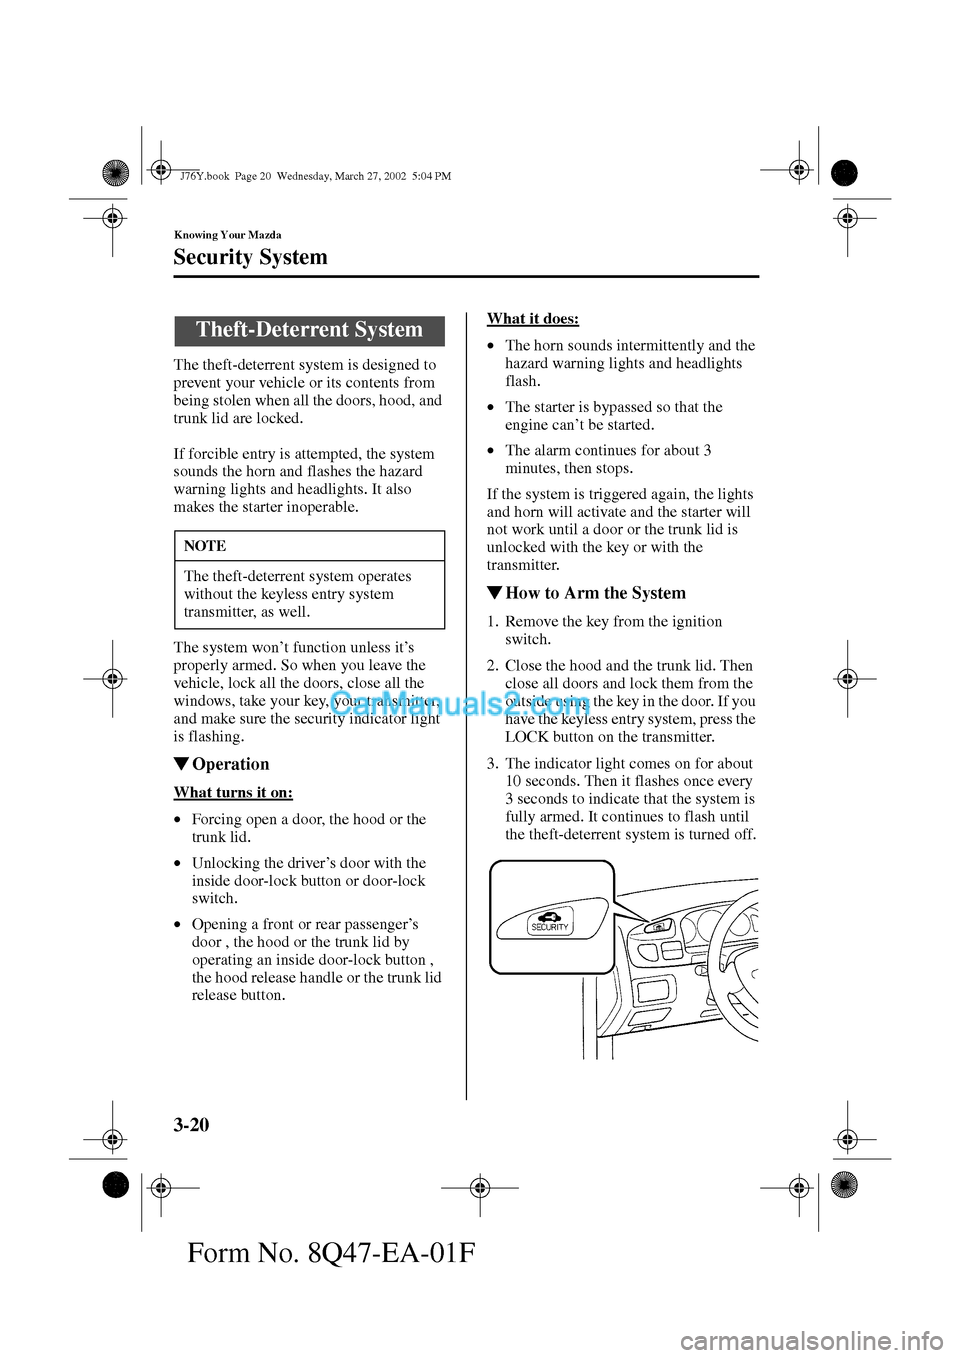 MAZDA MODEL MILLENIA 2002  Owners Manual (in English) 3-20
Knowing Your Mazda
Form No. 8Q47-EA-01F
Security System
The theft-deterrent system is designed to 
prevent your vehicle or its contents from 
being stolen when all the doors, hood, and 
trunk lid